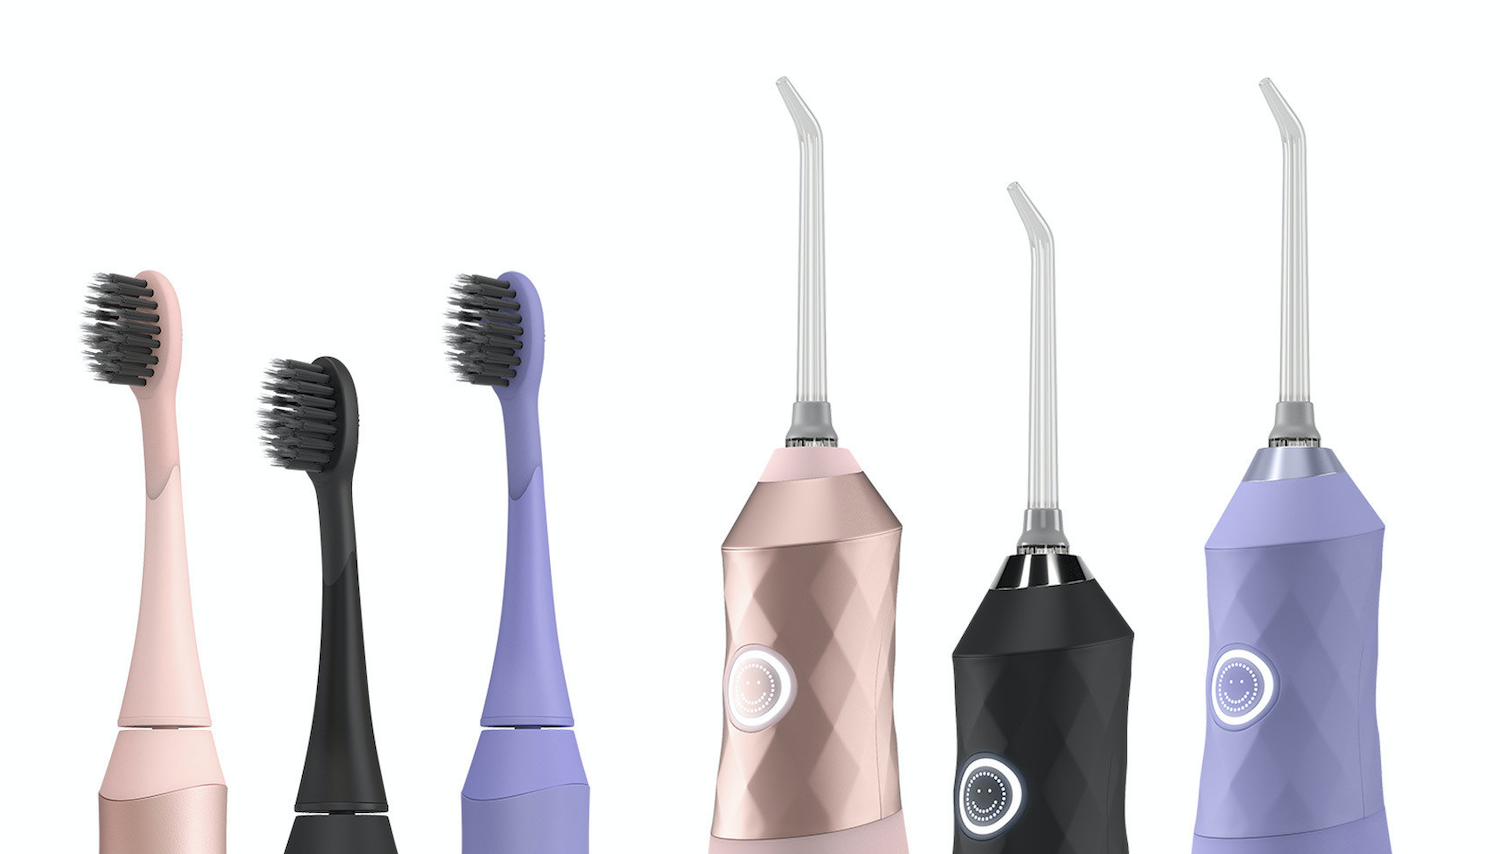 BURST Oral Care Launches Sonic Toothbrush and Water Flosser